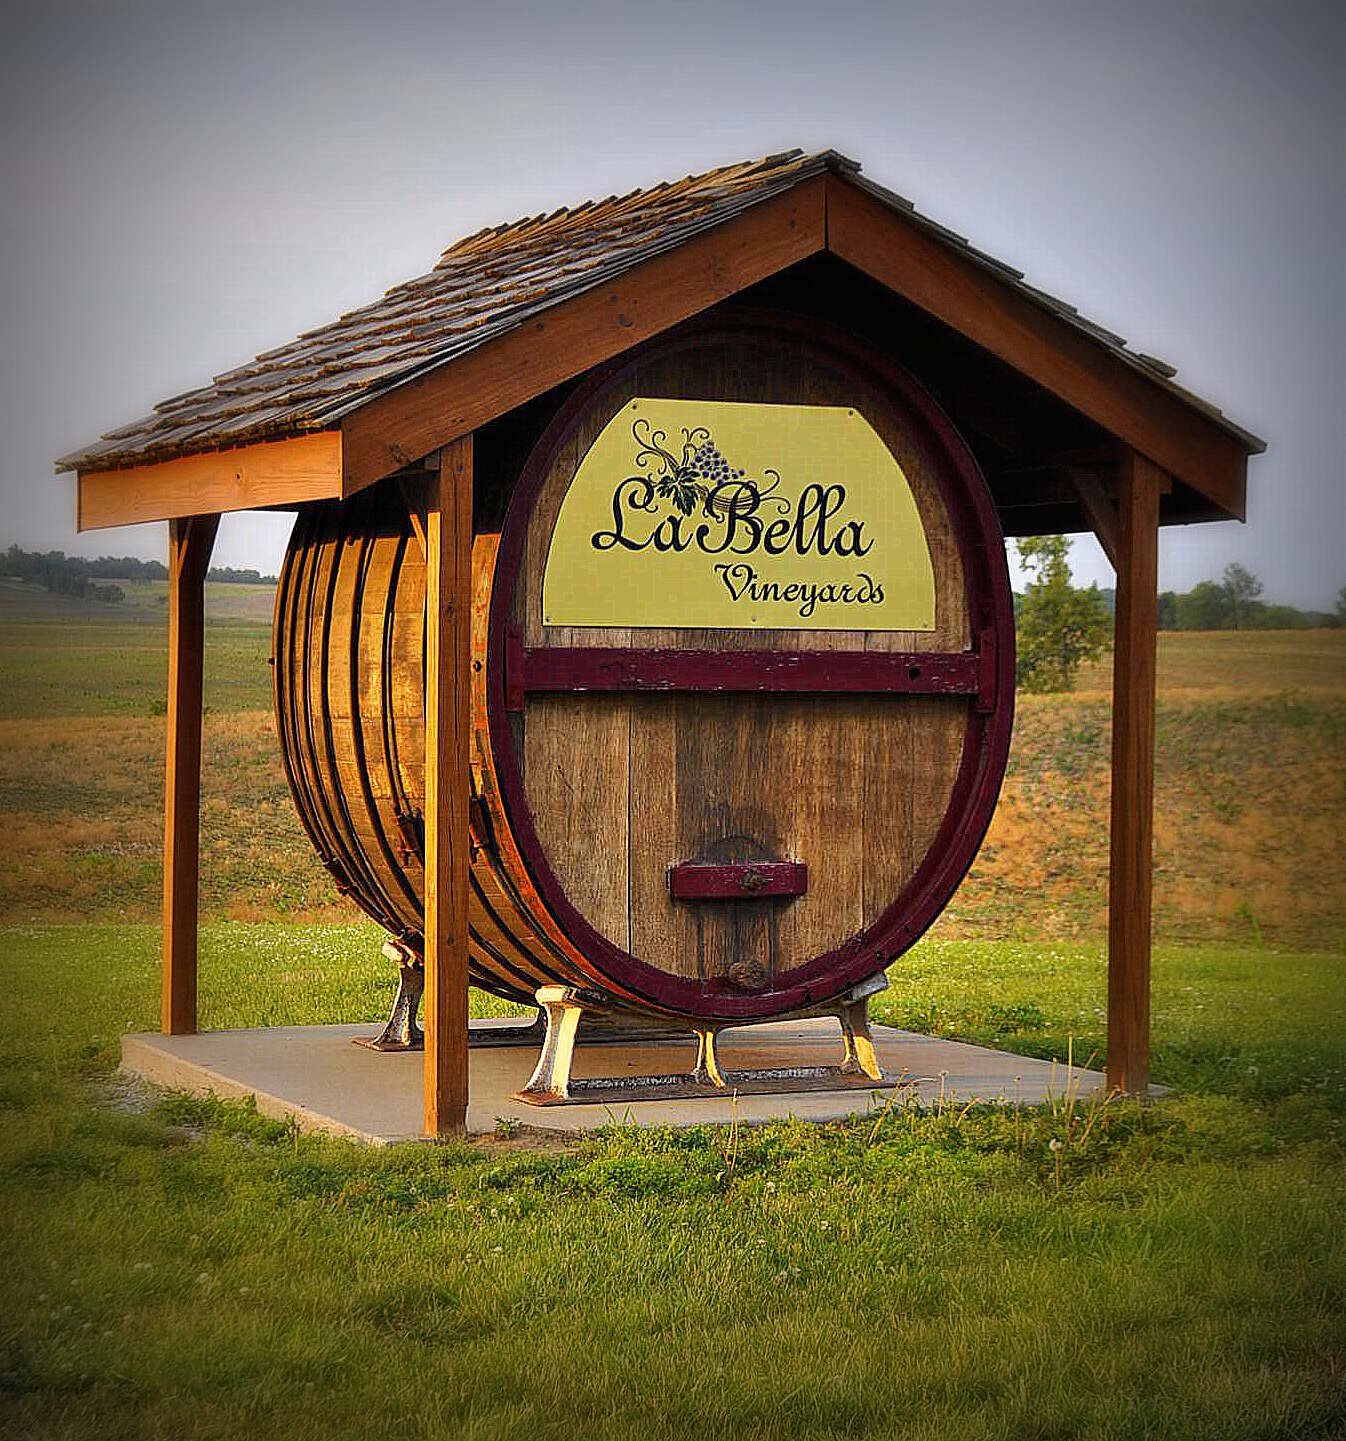 La Bella Vineyards & Winery - outdoor photo, daytime, of a large wine barrel with the vineyard logo underneath a gazebo-style roof.